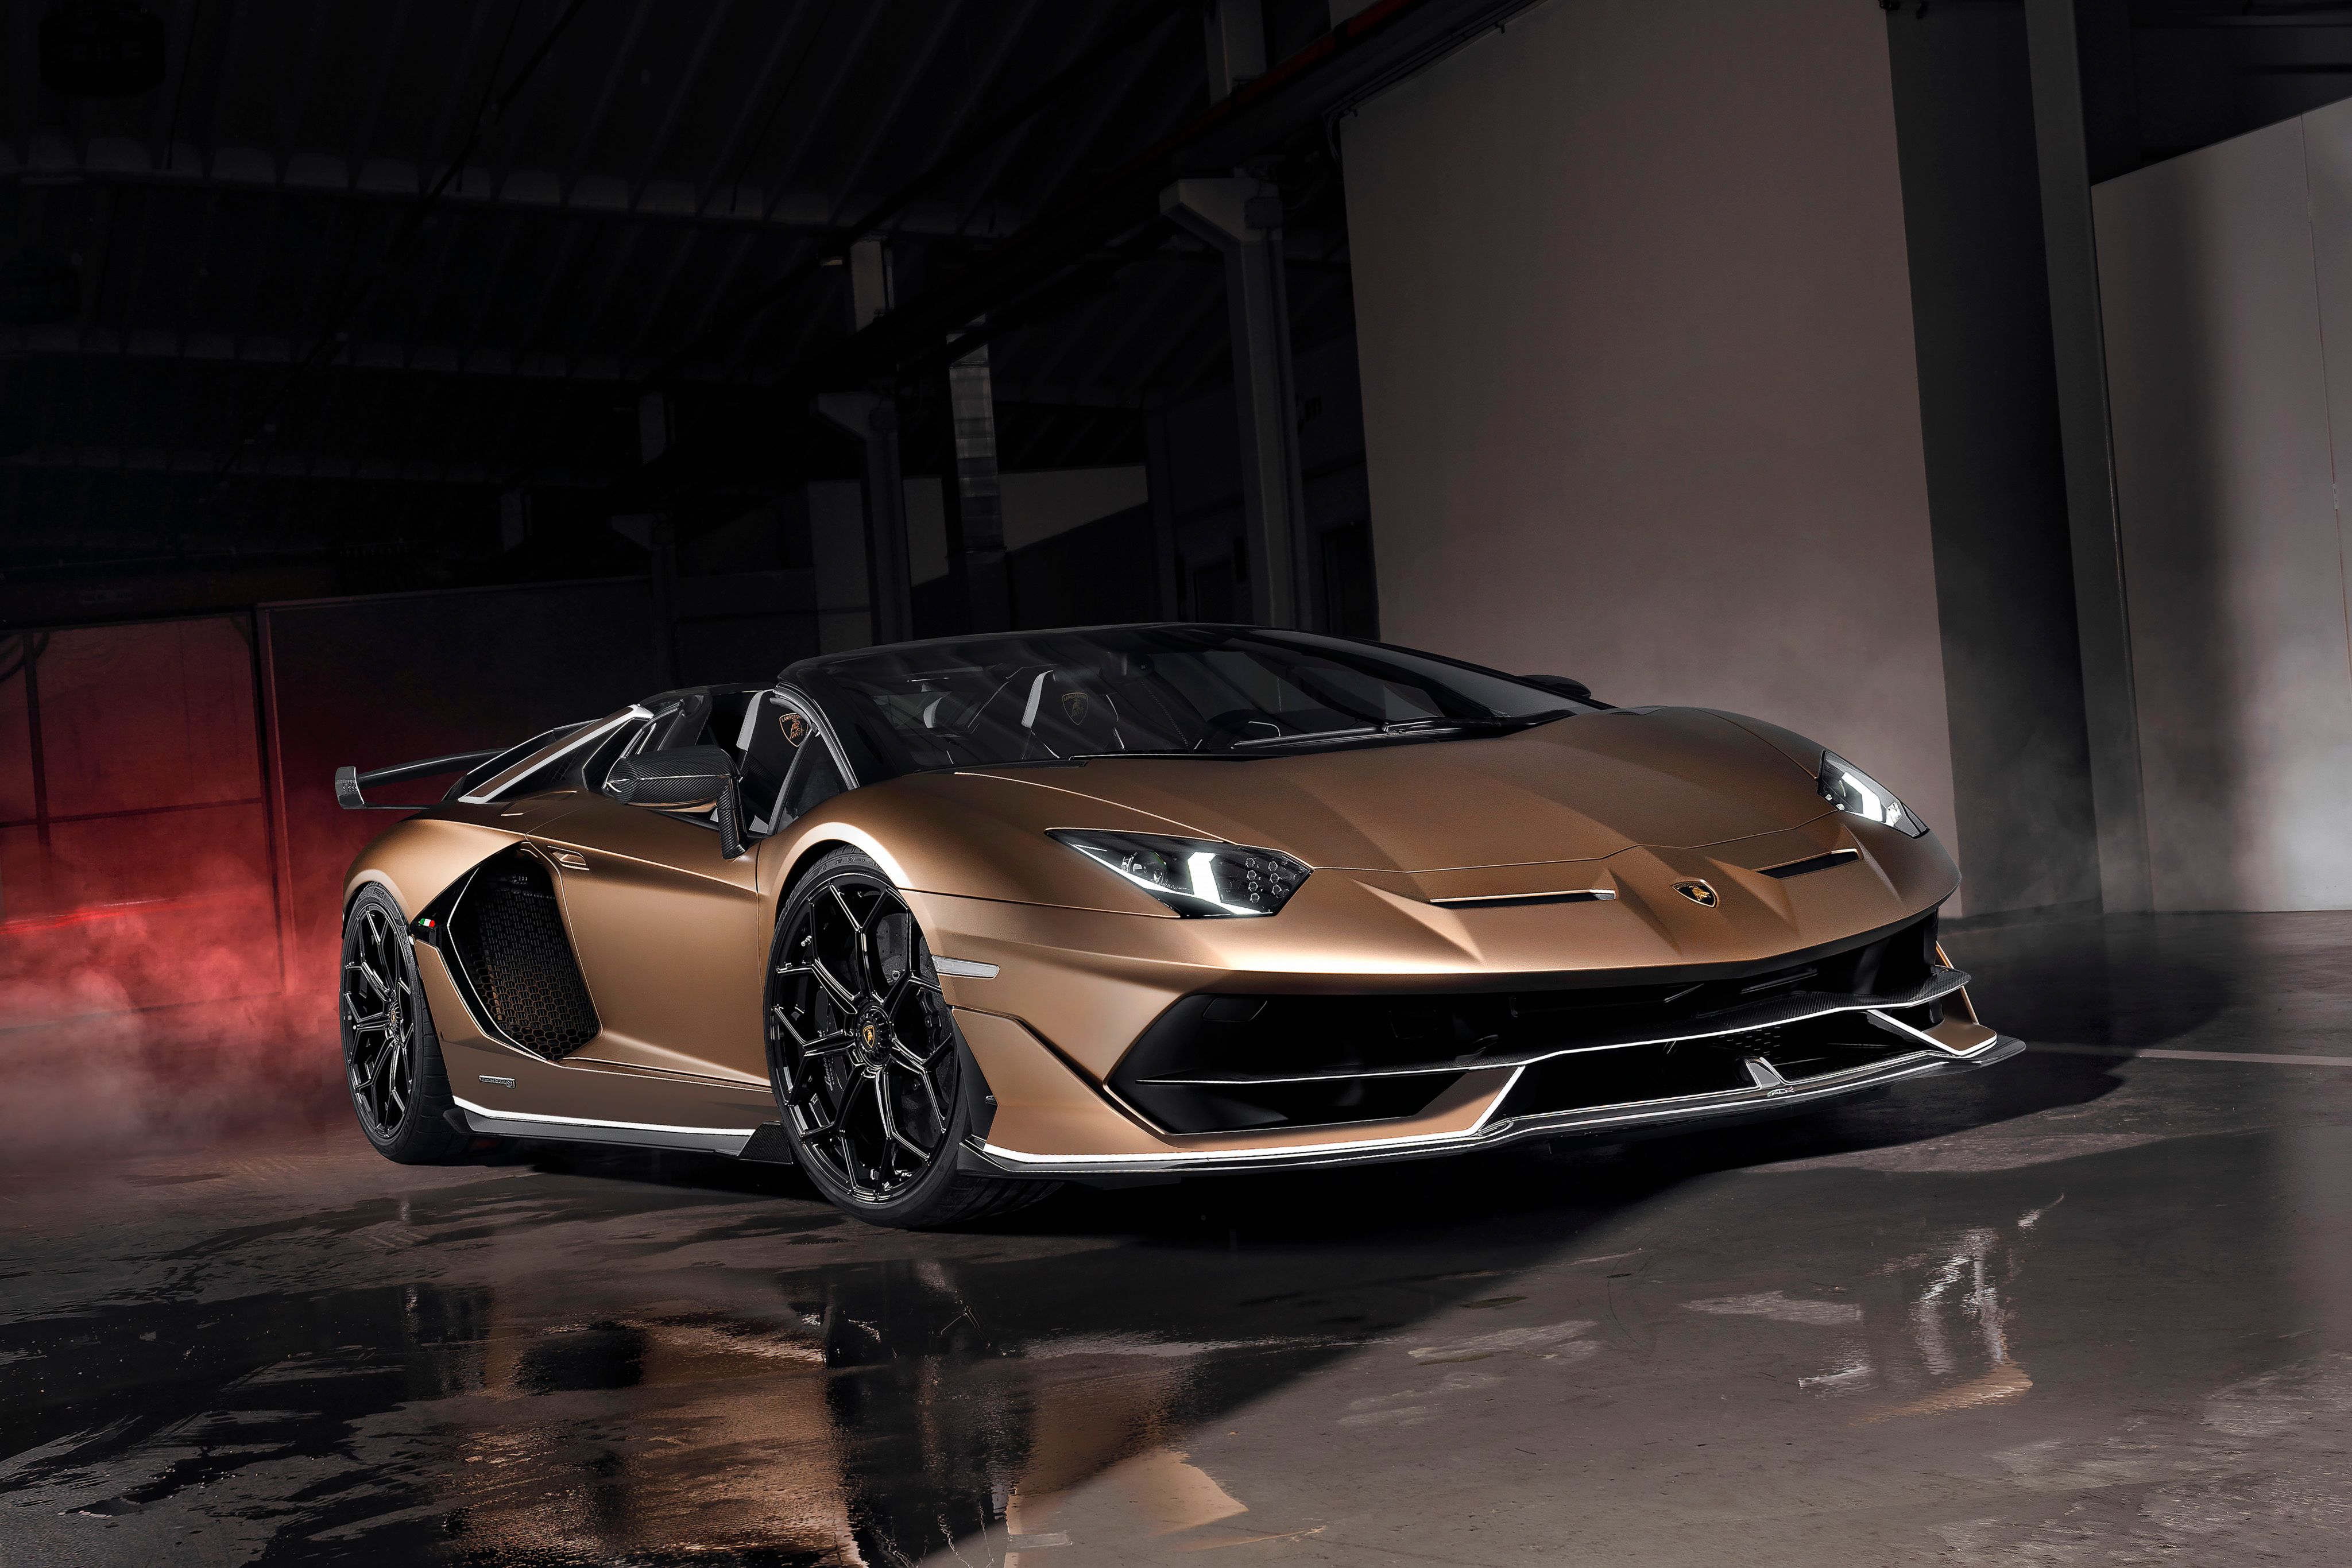 2019 The 2020 Lamborghini Aventador SVJ Roadster is Just a Hair Heavier and A Hair Slower than the SVJ Coupe